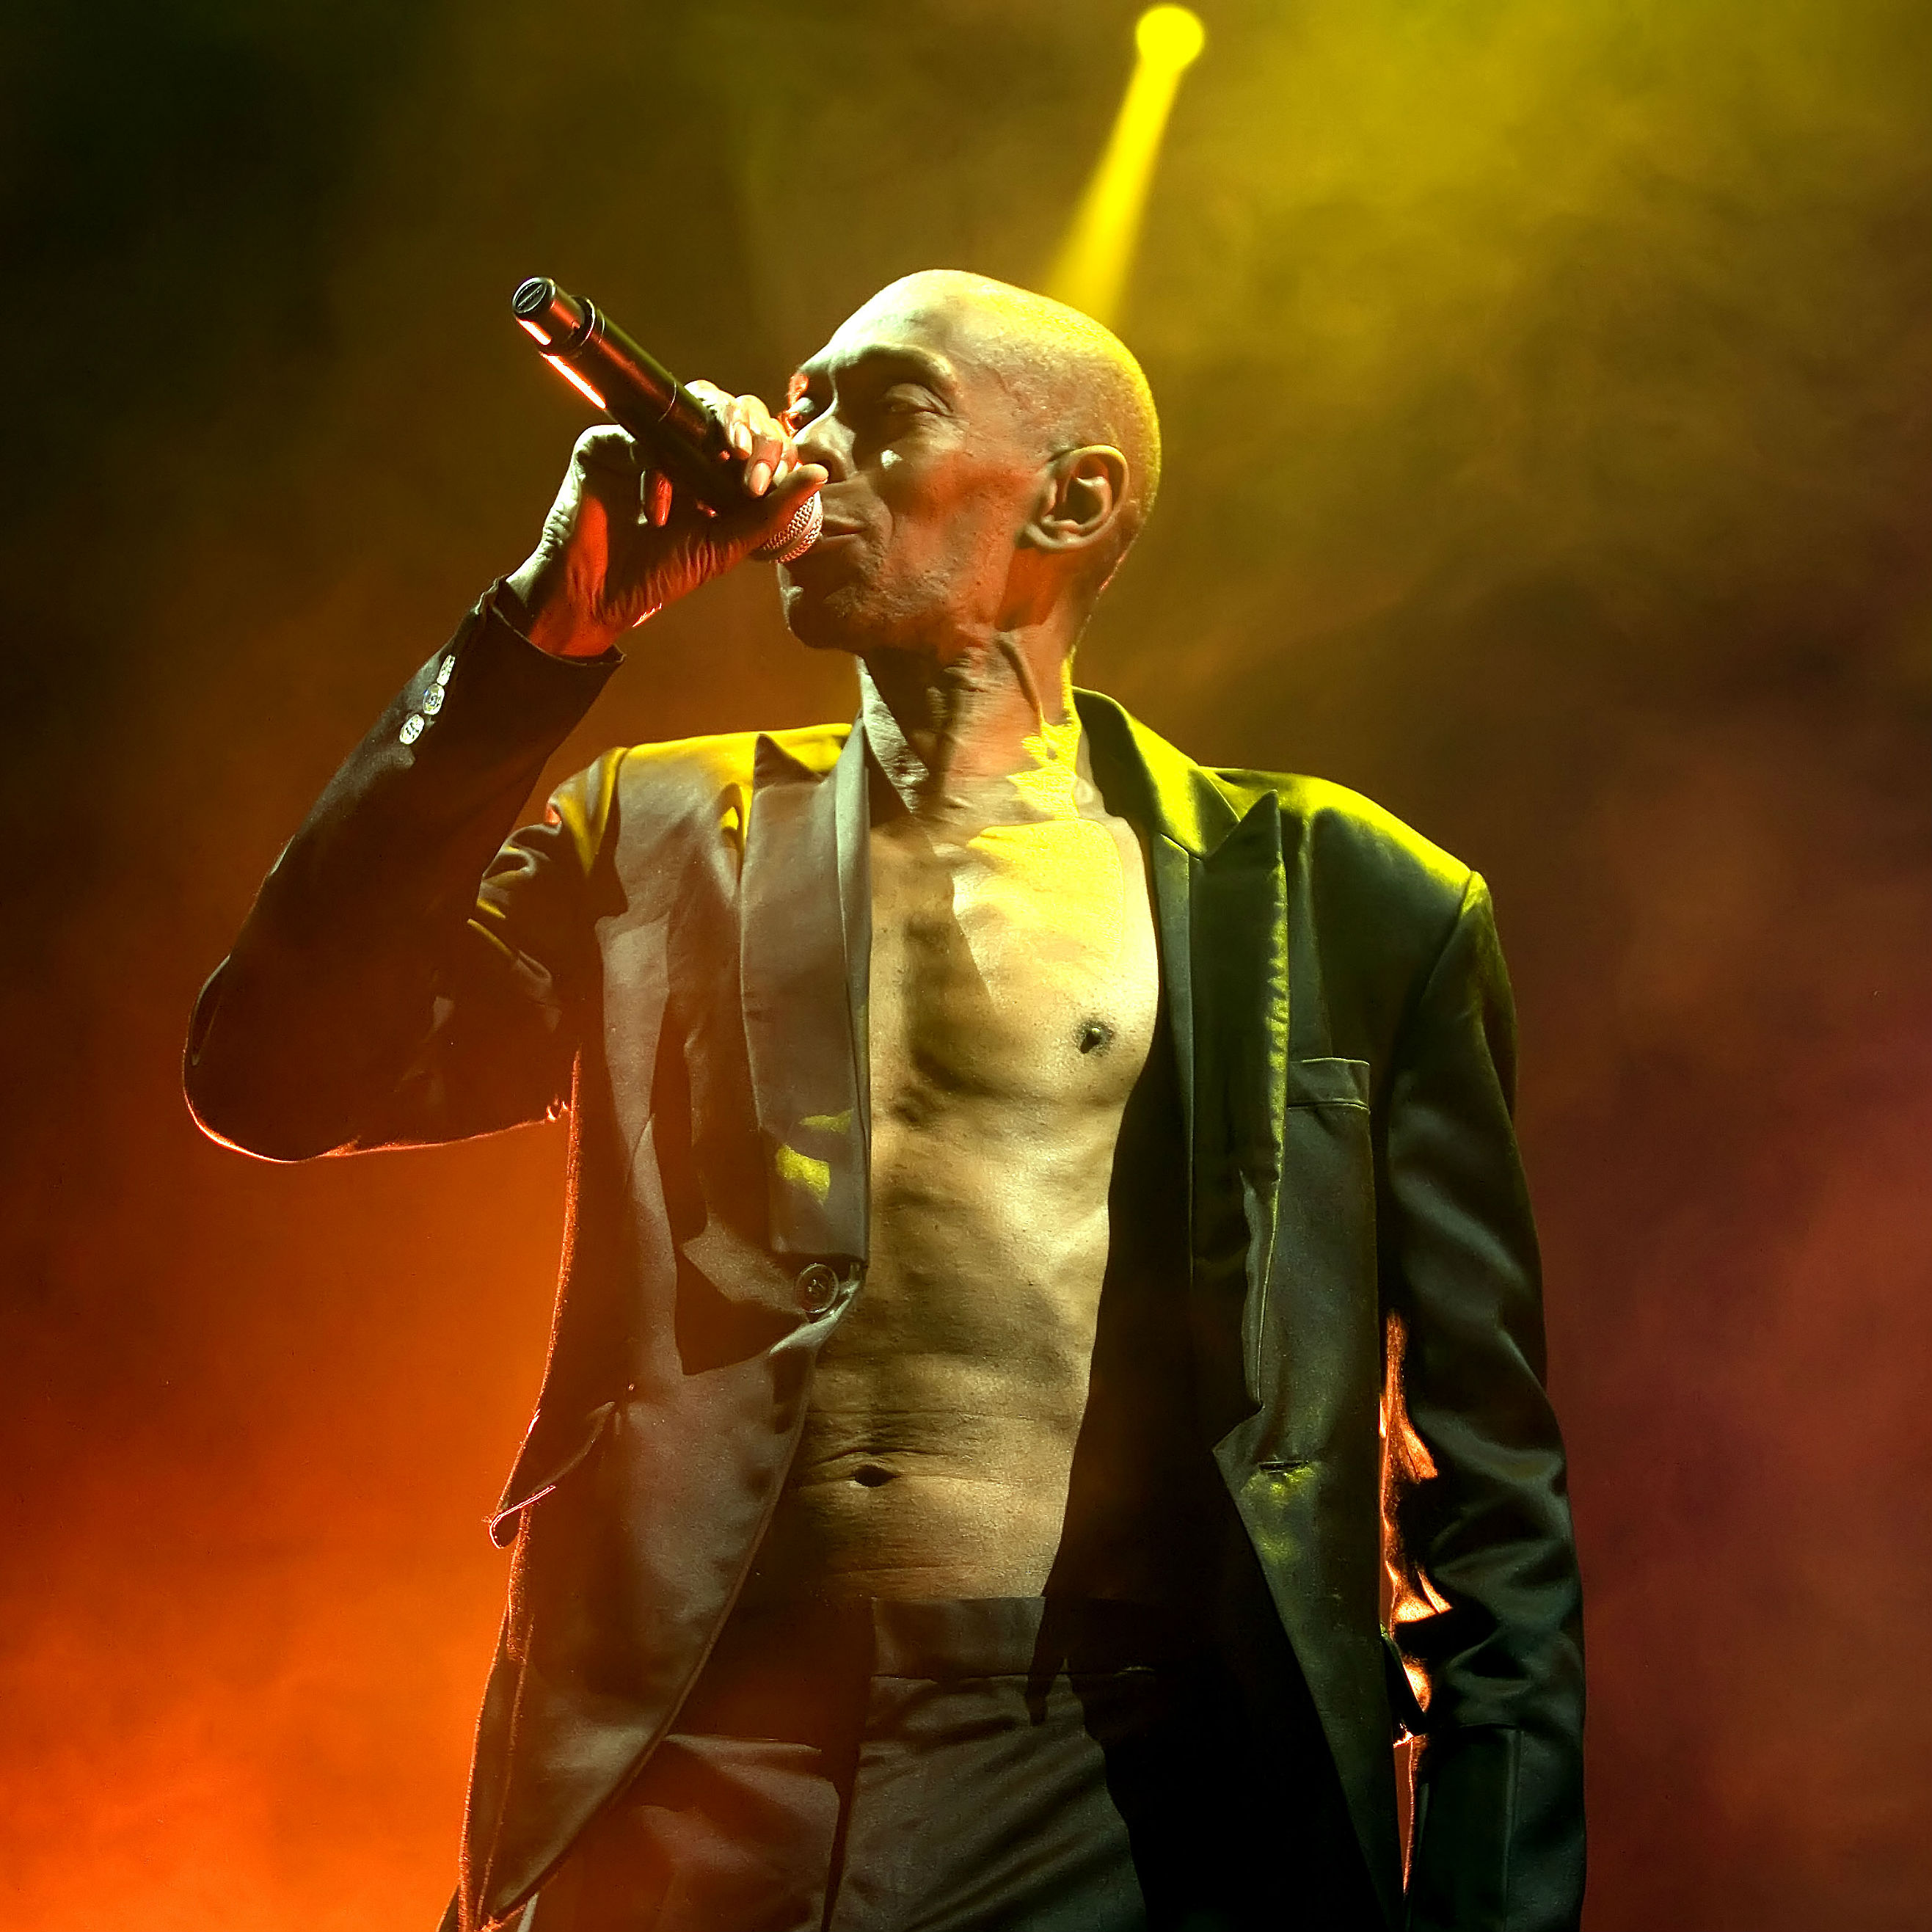 Faithless play T in the park 2016 in UK tour, playing God is a DJ